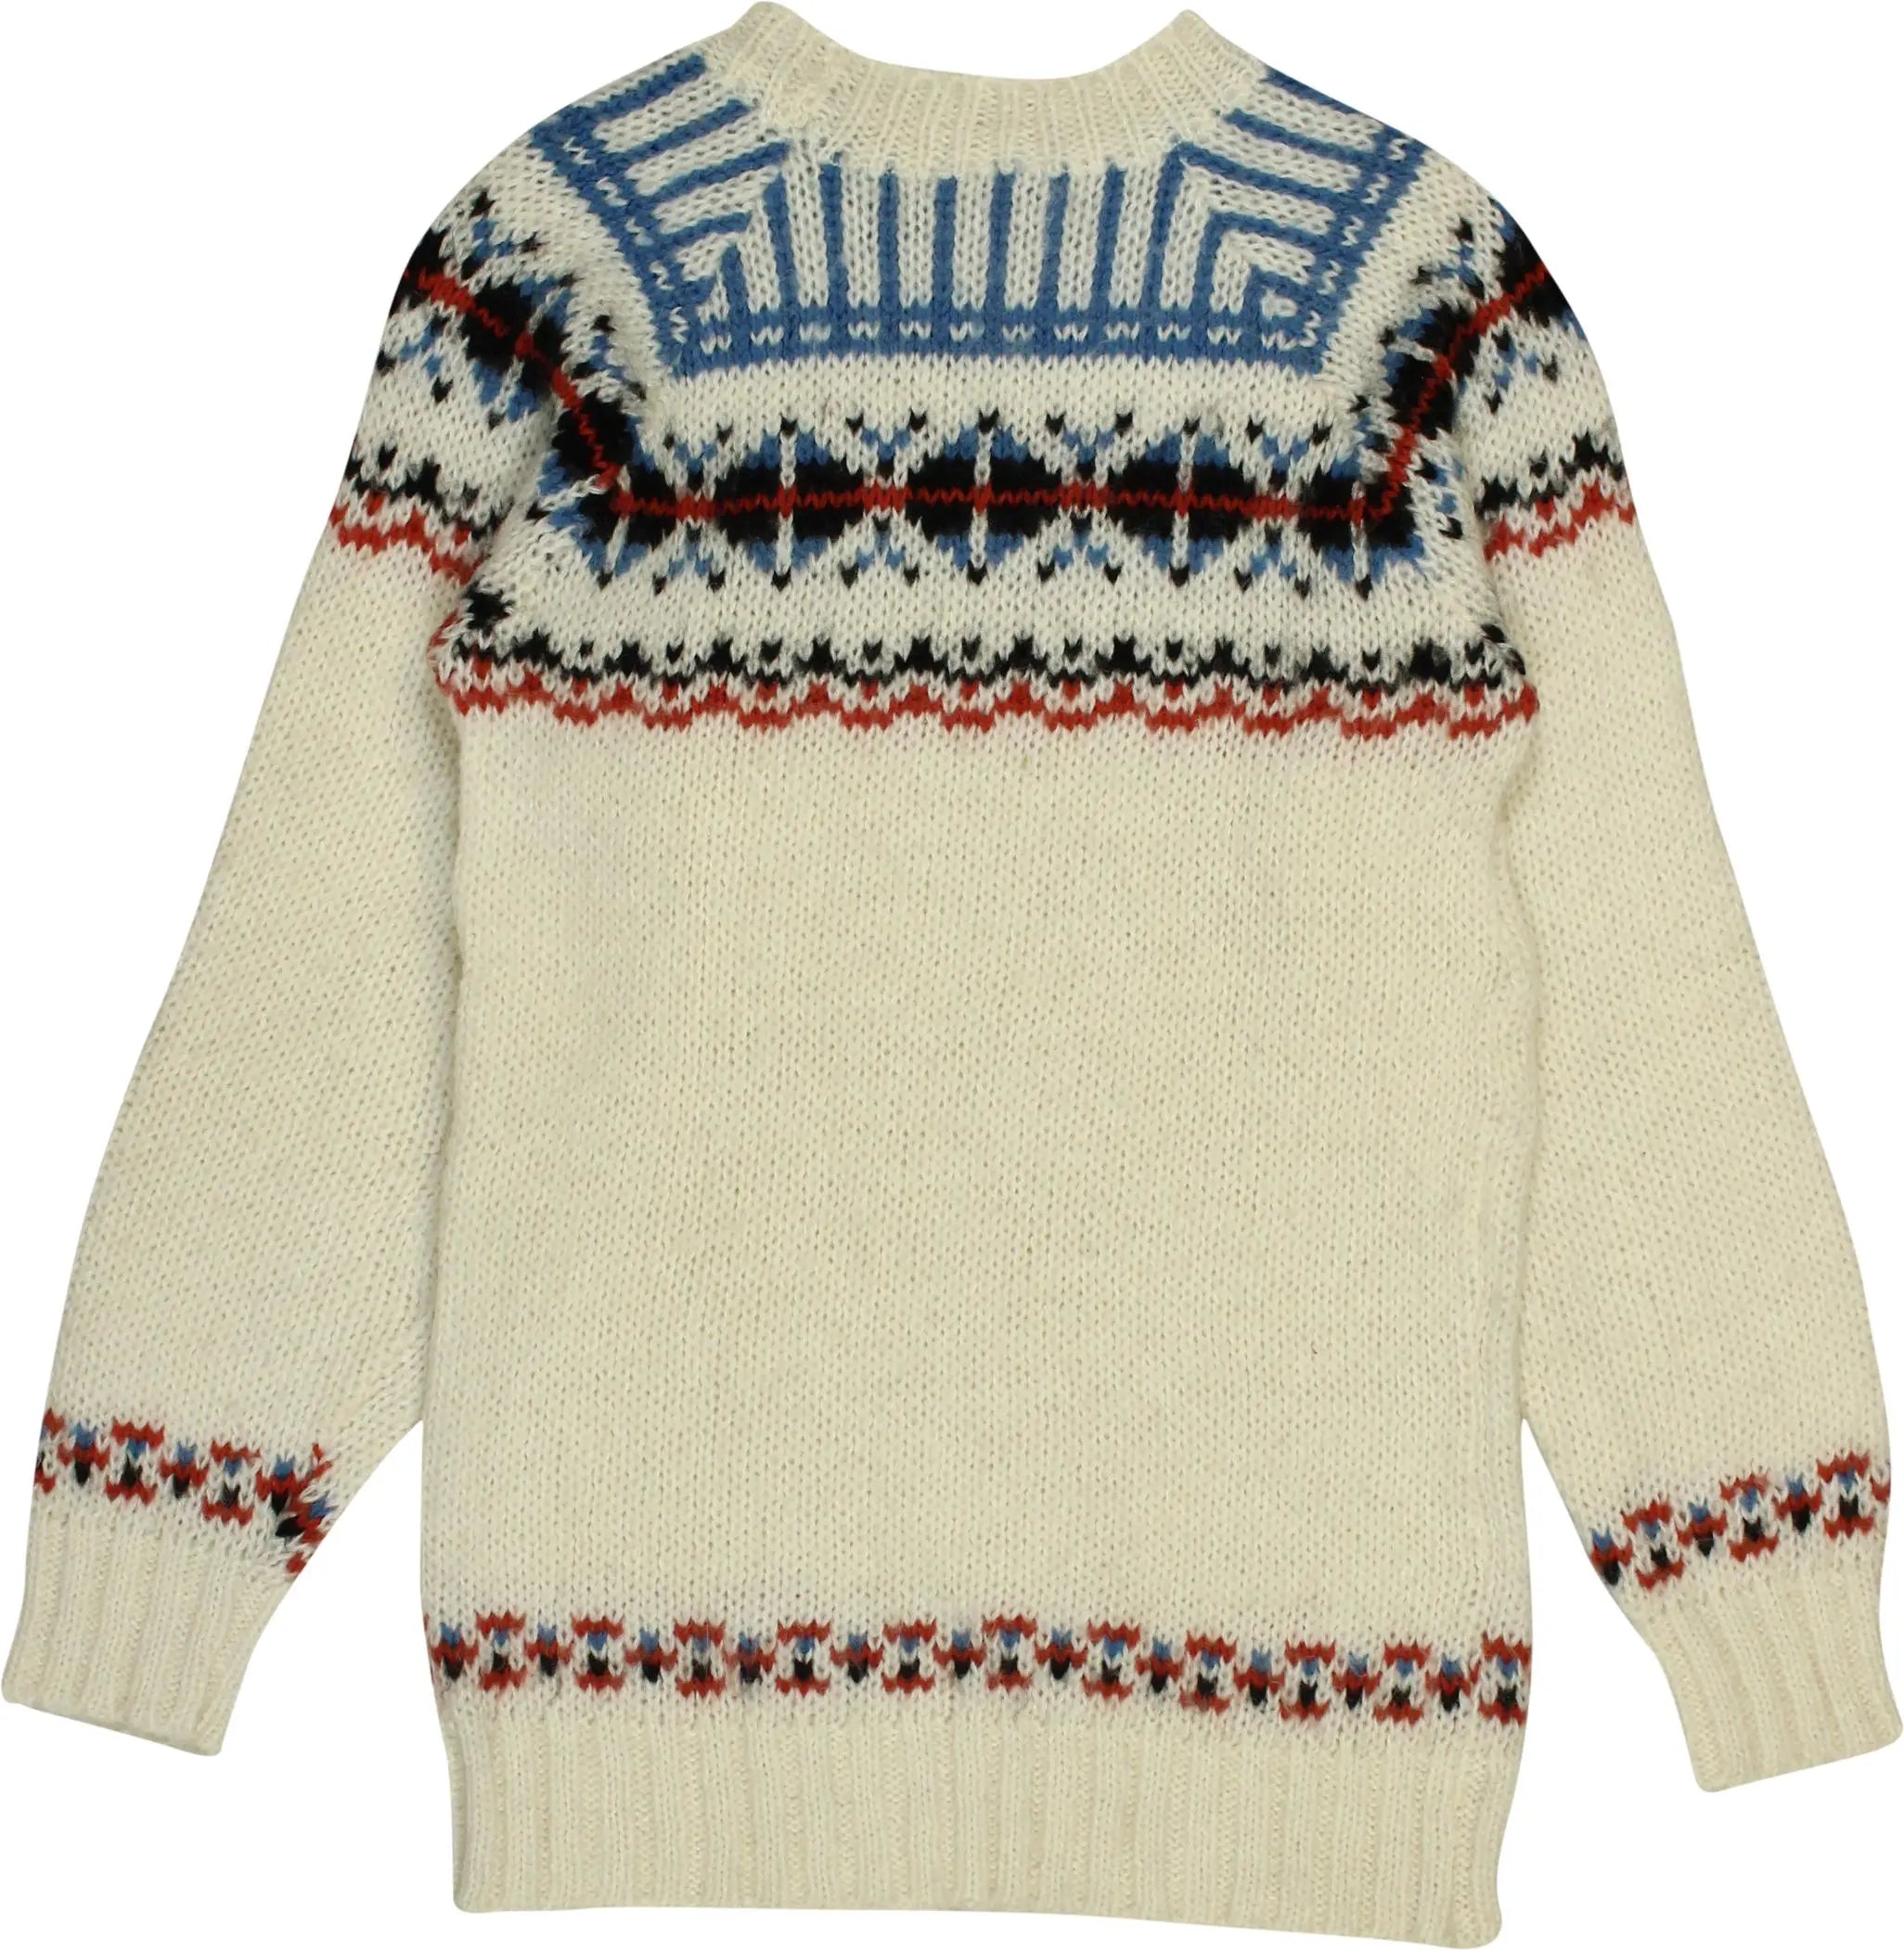 Unknown - Cream Knitted Jumper- ThriftTale.com - Vintage and second handclothing